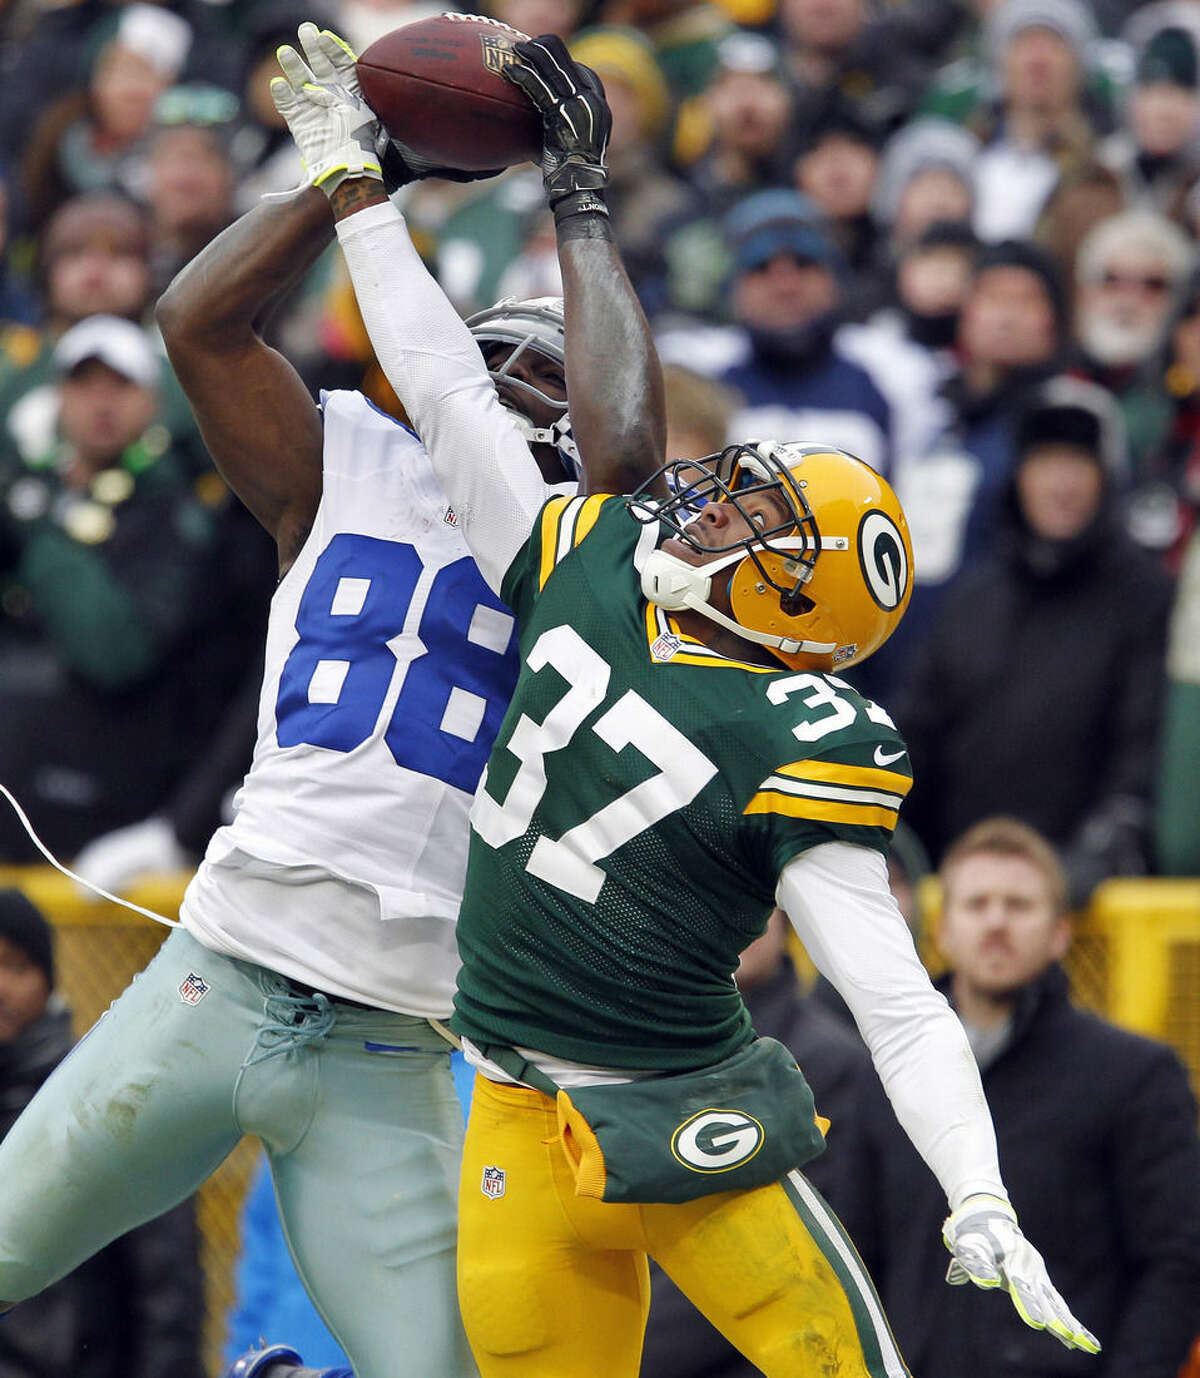 ADVANCE FOR WEEKEND EDITION, JAN. 31-FEB. 1 - FILE - In this Jan. 11, 2015, file photo, Dallas Cowboys wide receiver Dez Bryant (88) catches a pass against Green Bay Packers cornerback Sam Shields (37) during the second half of an NFL divisional playoff football game in Green Bay, Wis. The play was reversed. Concussions, domestic abuse arrests, questionable officiating and another cheating controversy. And yet, the league still popular as ever with ratings and revenue streams that make other leagues jealous. (AP Photo/Matt Ludtke, File)